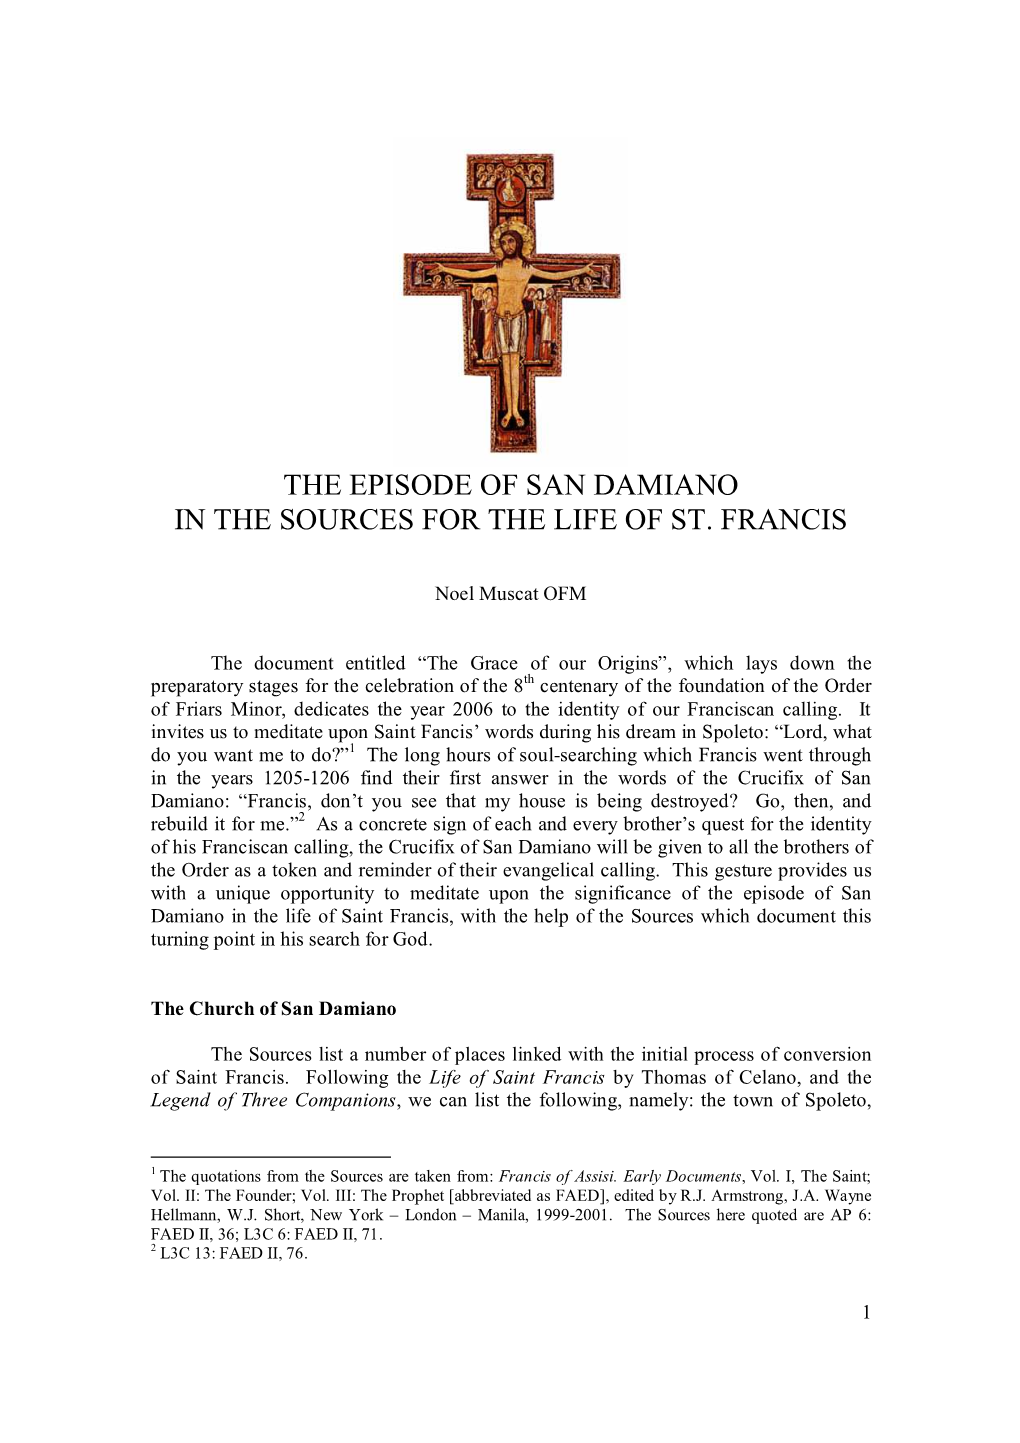 San Damiano Crucifix, As It Were, Marks for Francis the Beginning of a Following of Christ ( Sequela Christi ), Which Characterizes All the Episodes of His Life